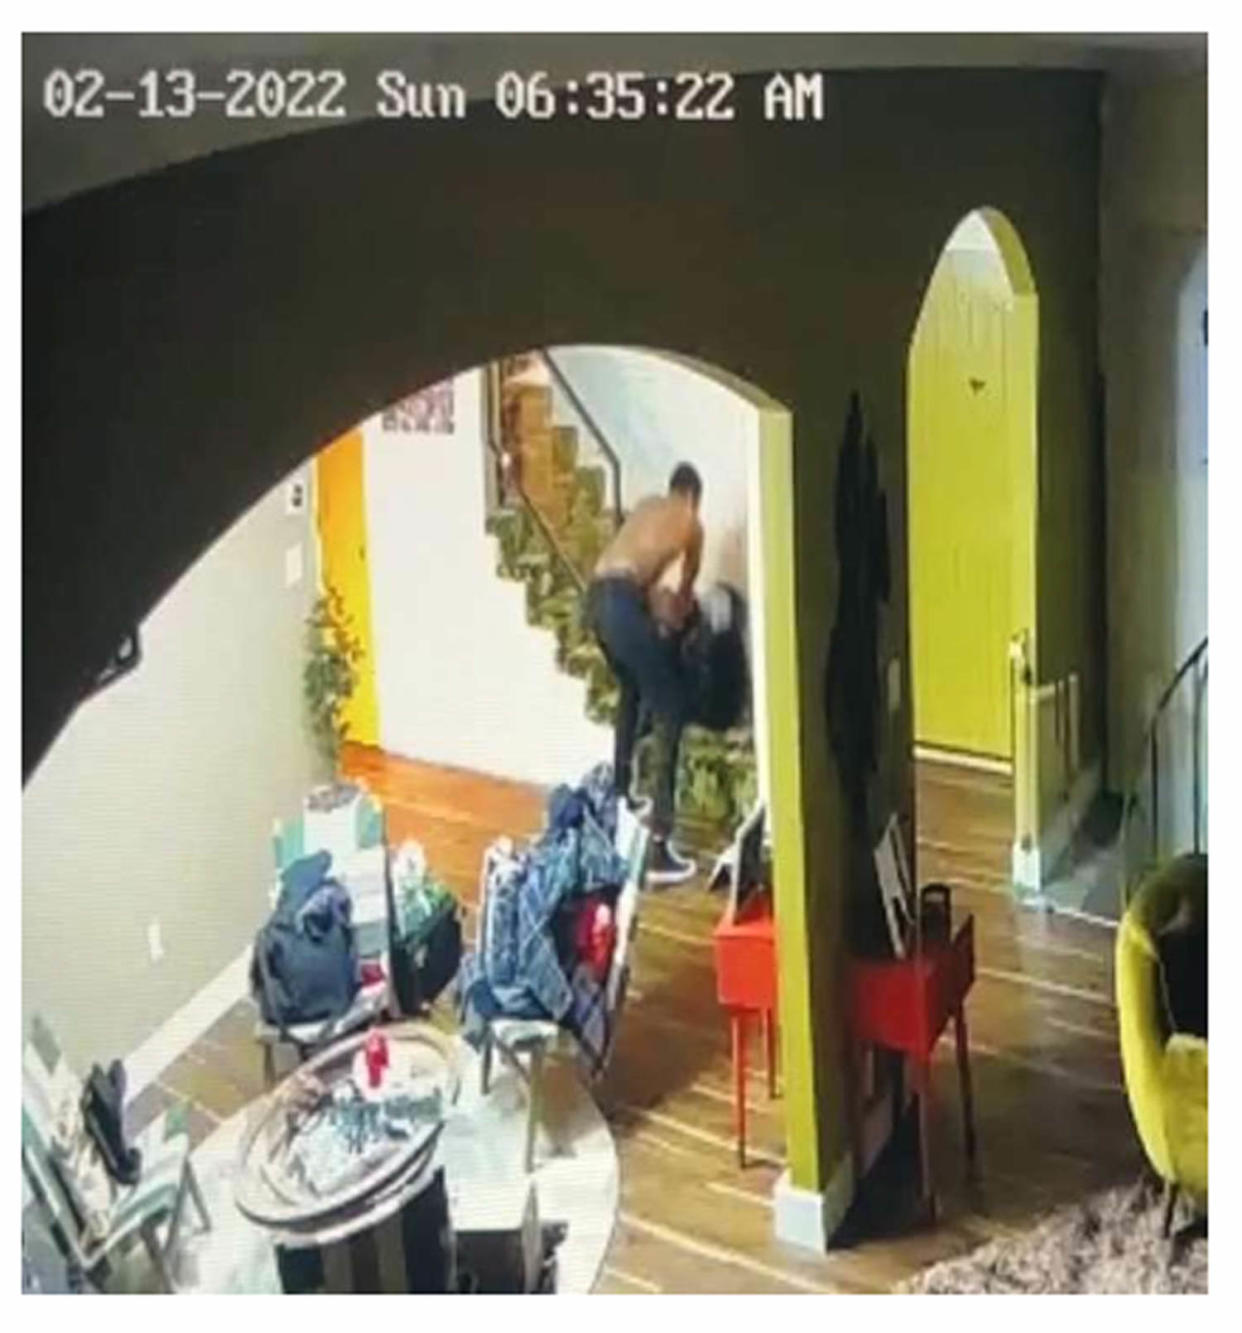 A screenshot from home surveillance footage showing Darius Jackson allegedly choking and body slamming Keke Palmer in her home on Feb. 13, 2022. (Superior Court of California County of Los Angeles)